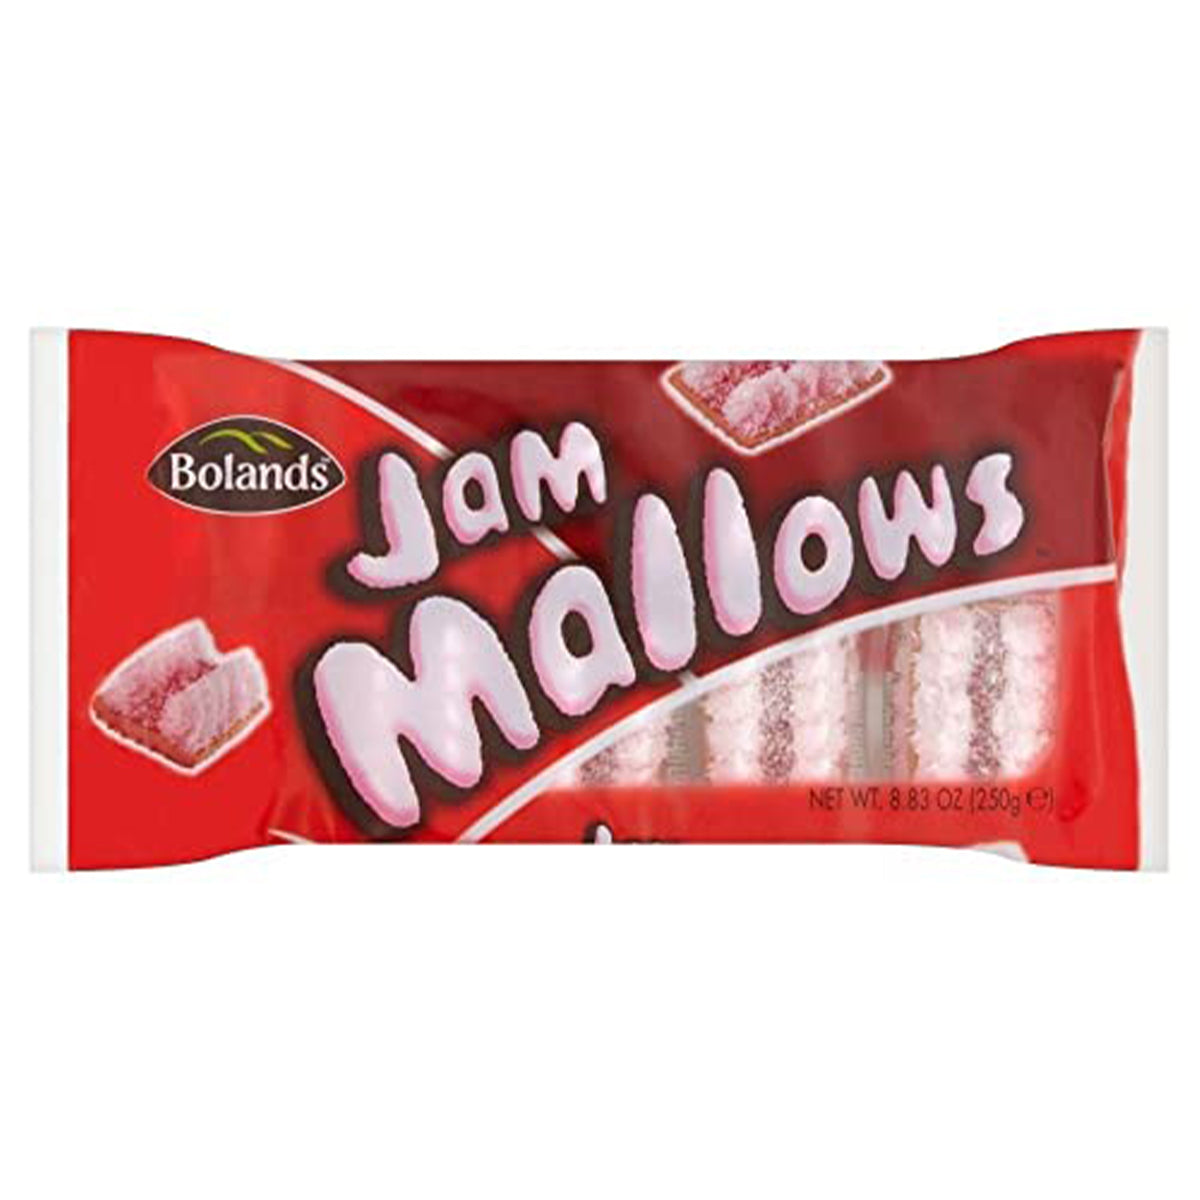 Bolands - Jam Mallows - 250g - Continental Food Store